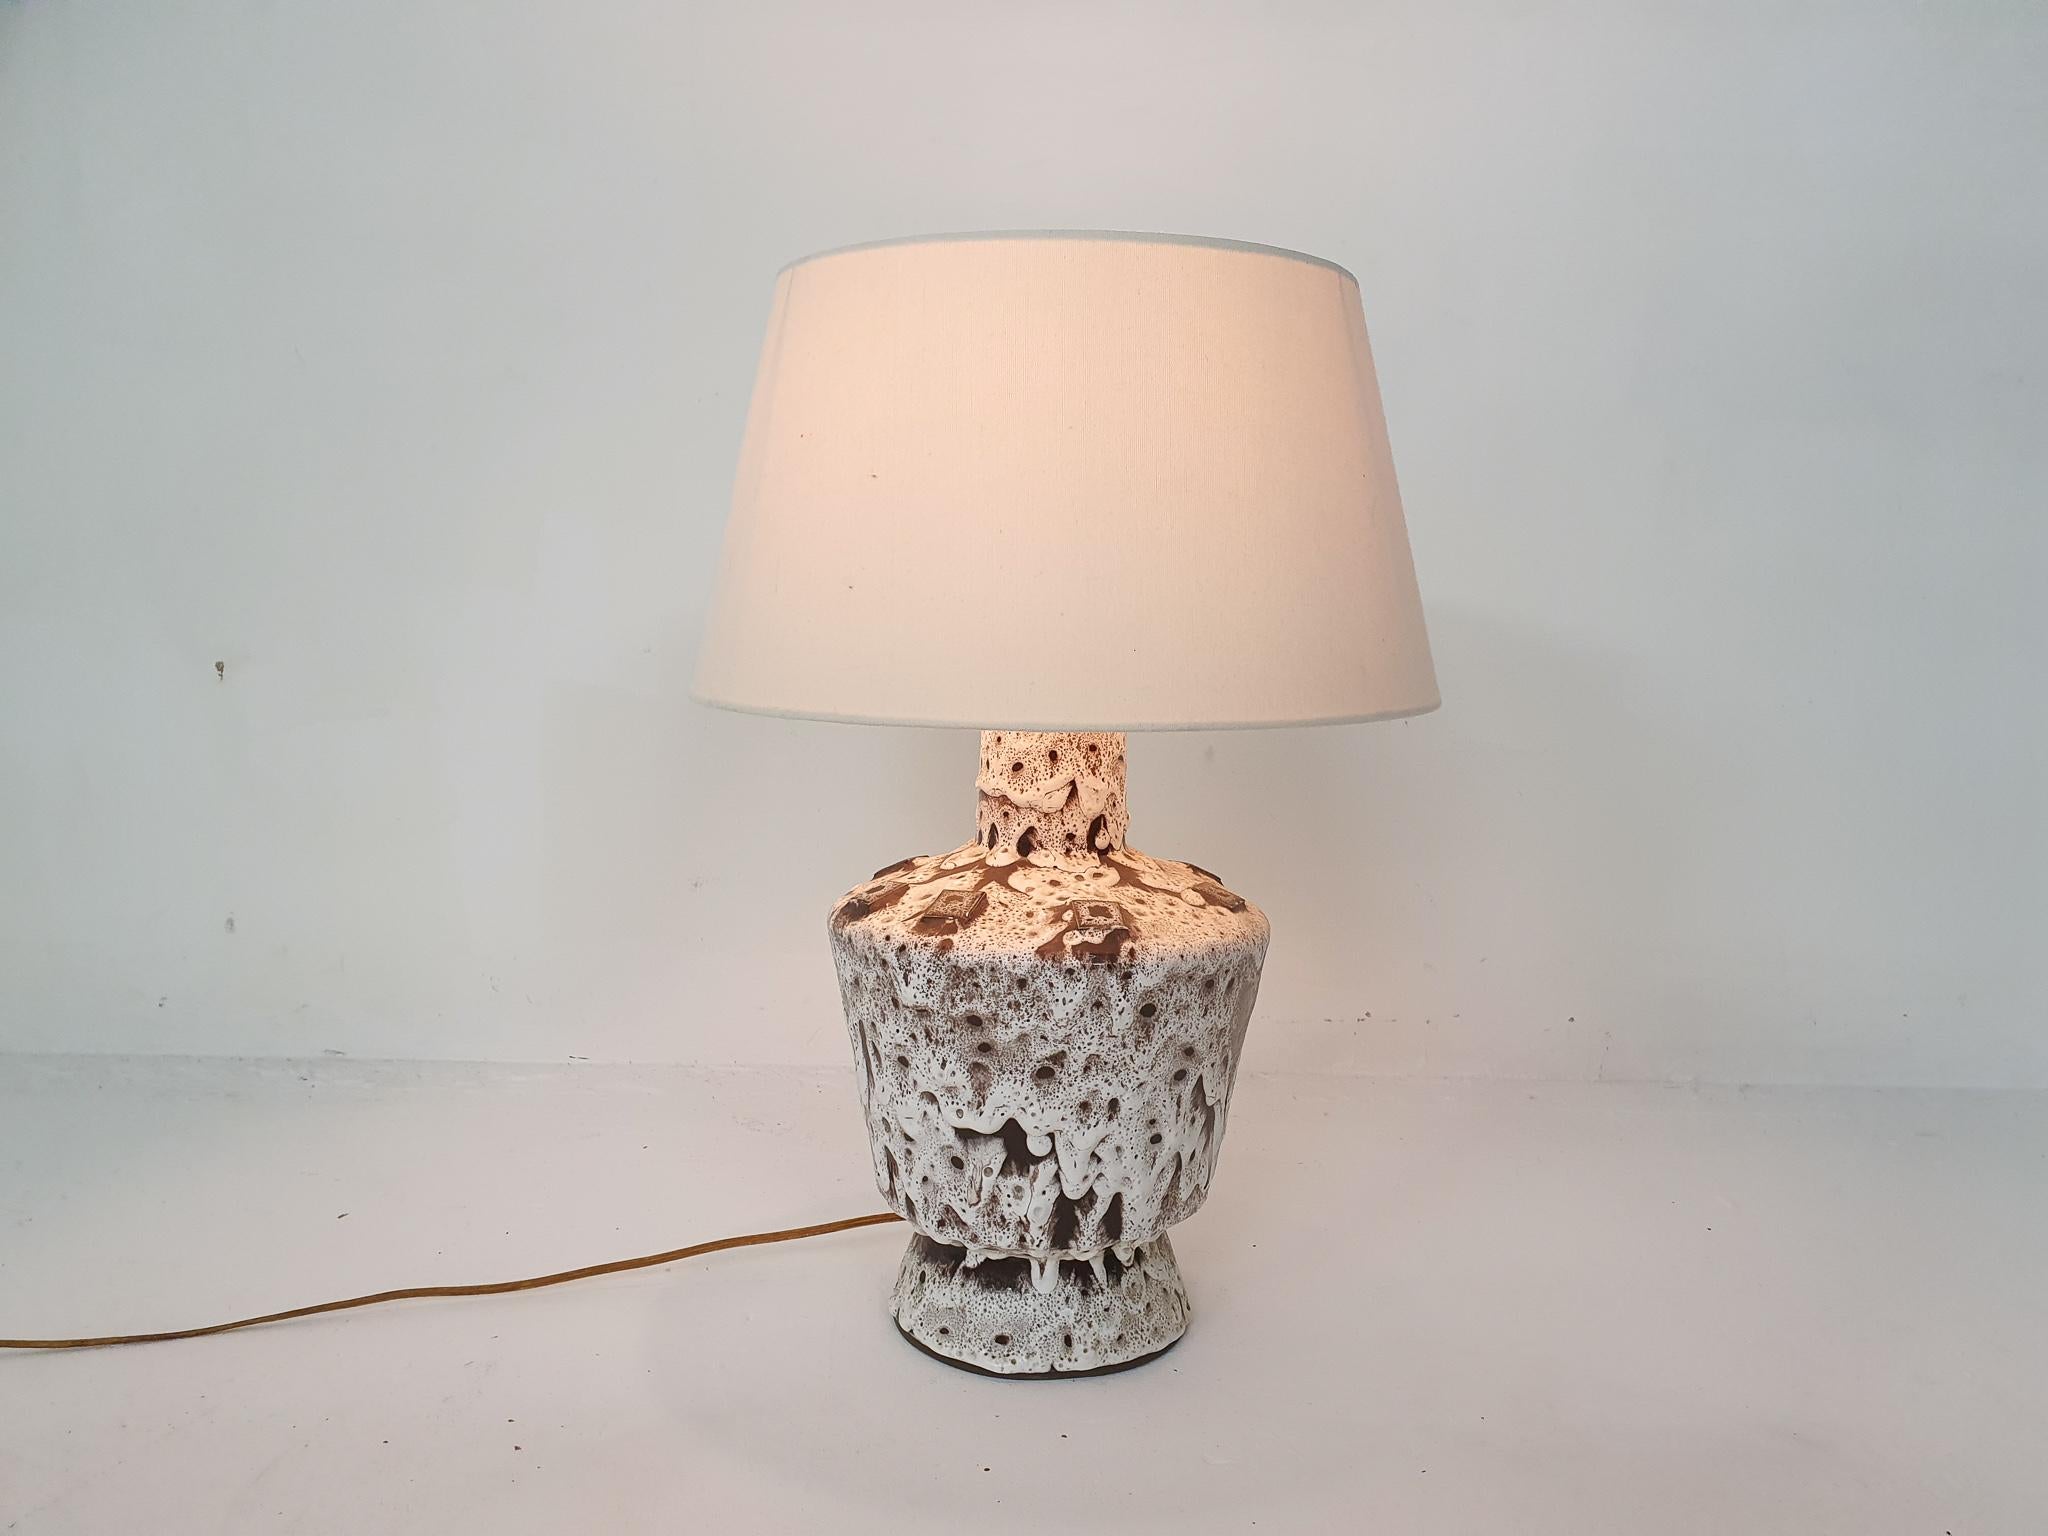 White and brown ceramic table light with white lamp shade. It has the original wiring, but we can replace it with a new wire, if desired.